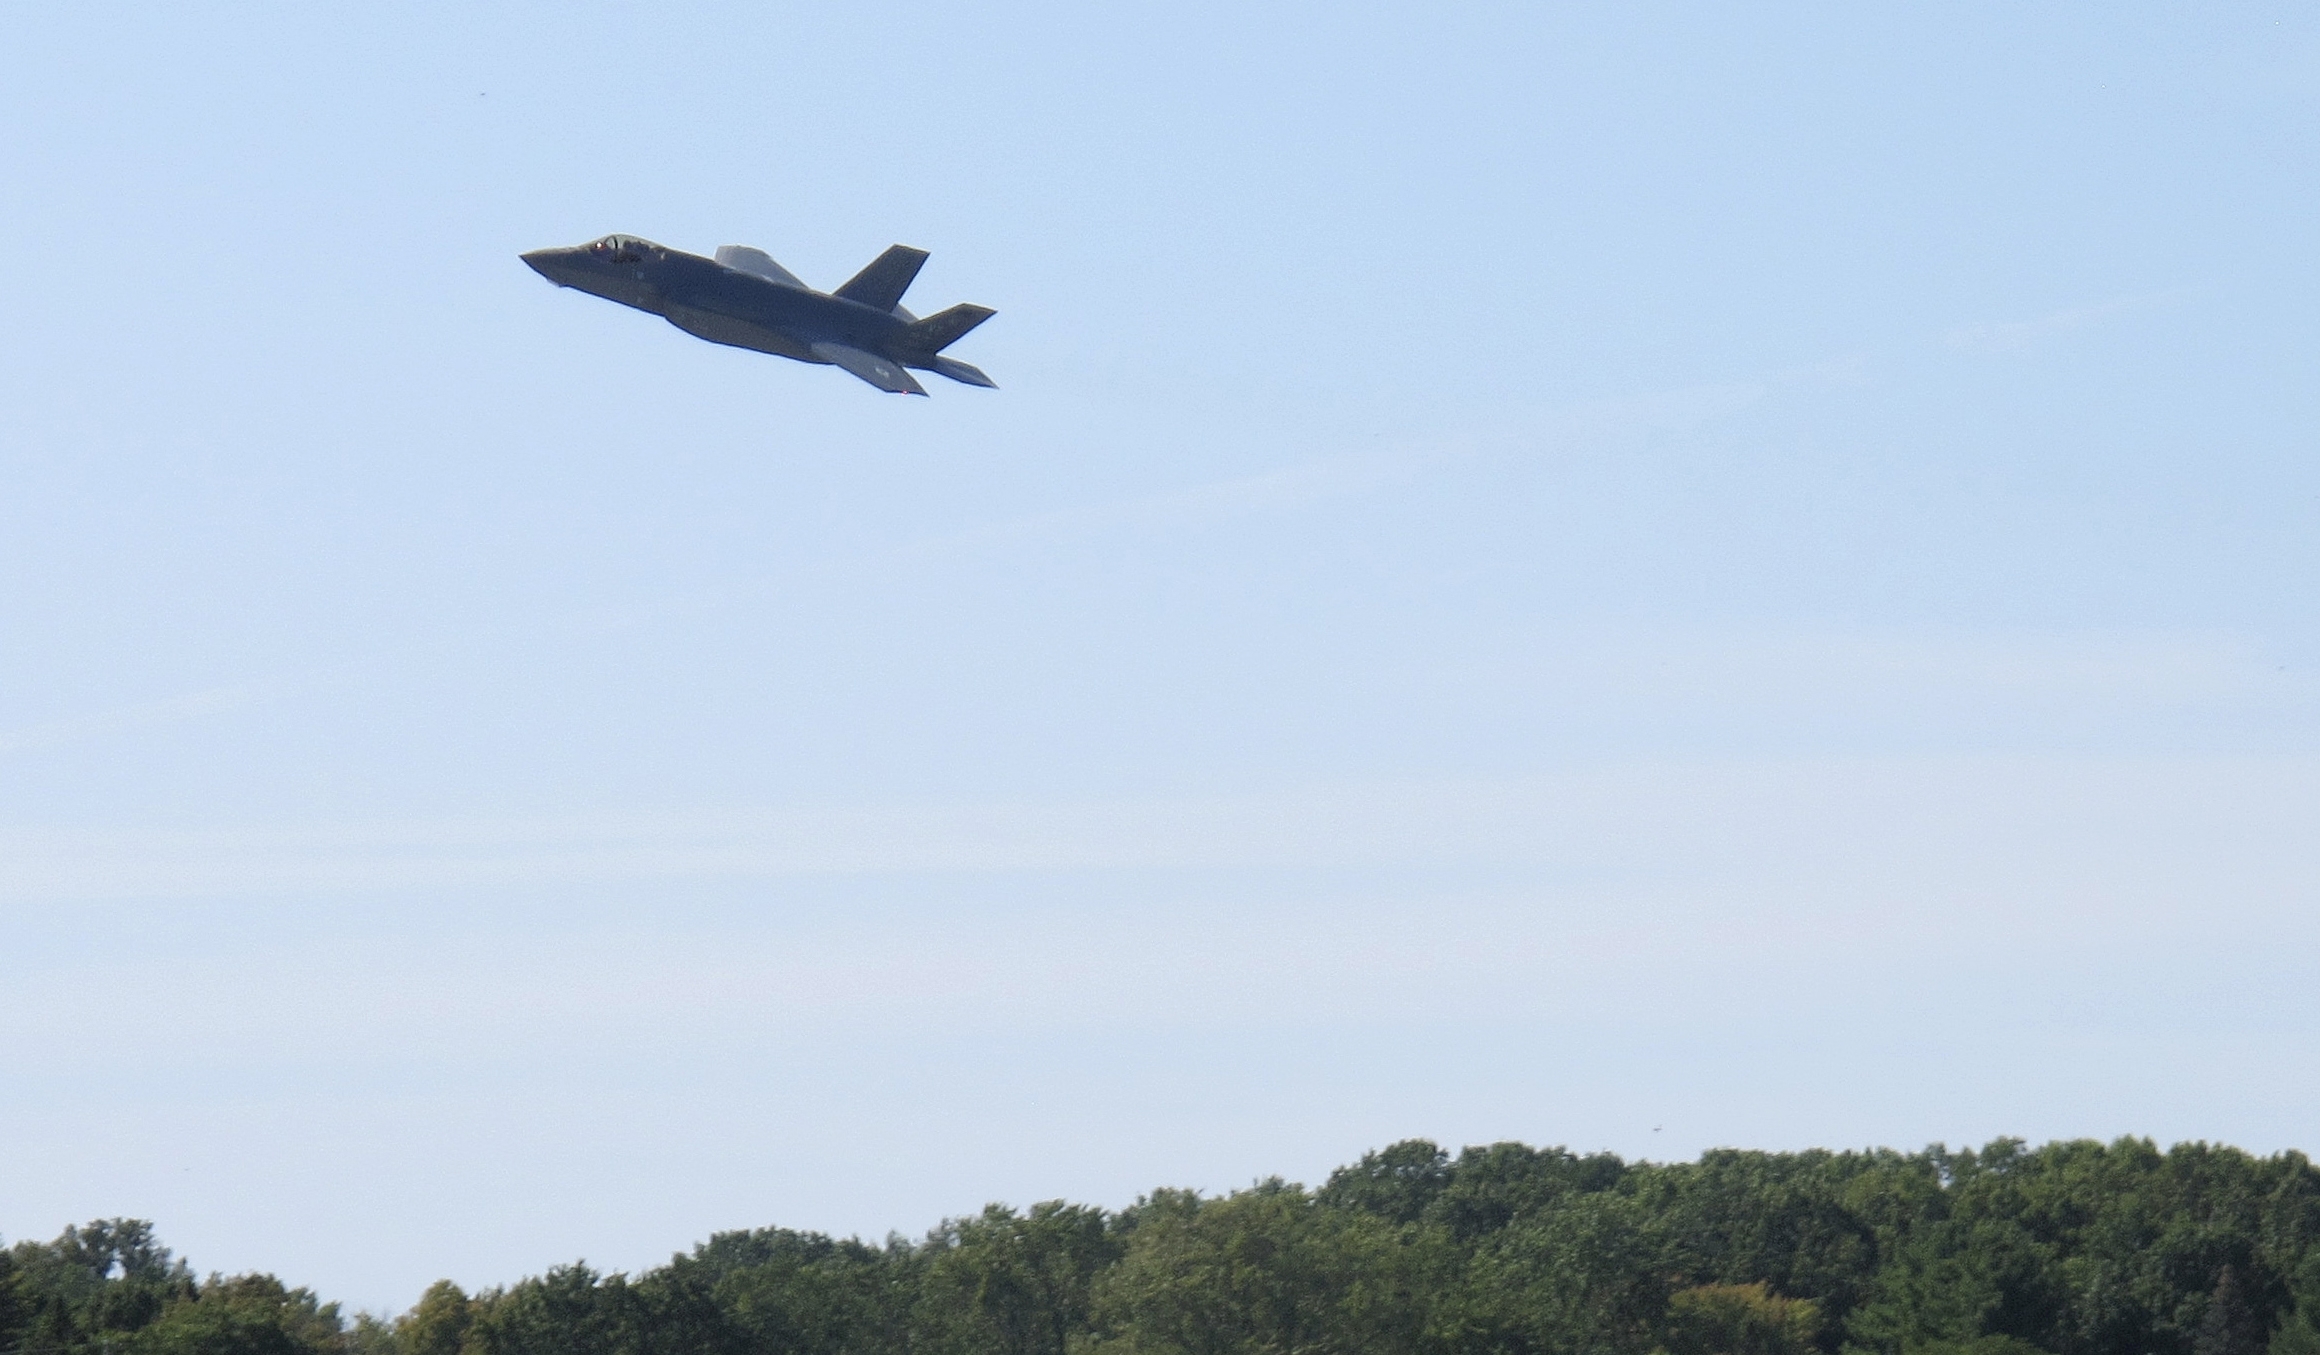 An F-35 fighter jet over the Vermont Air National Guard Base